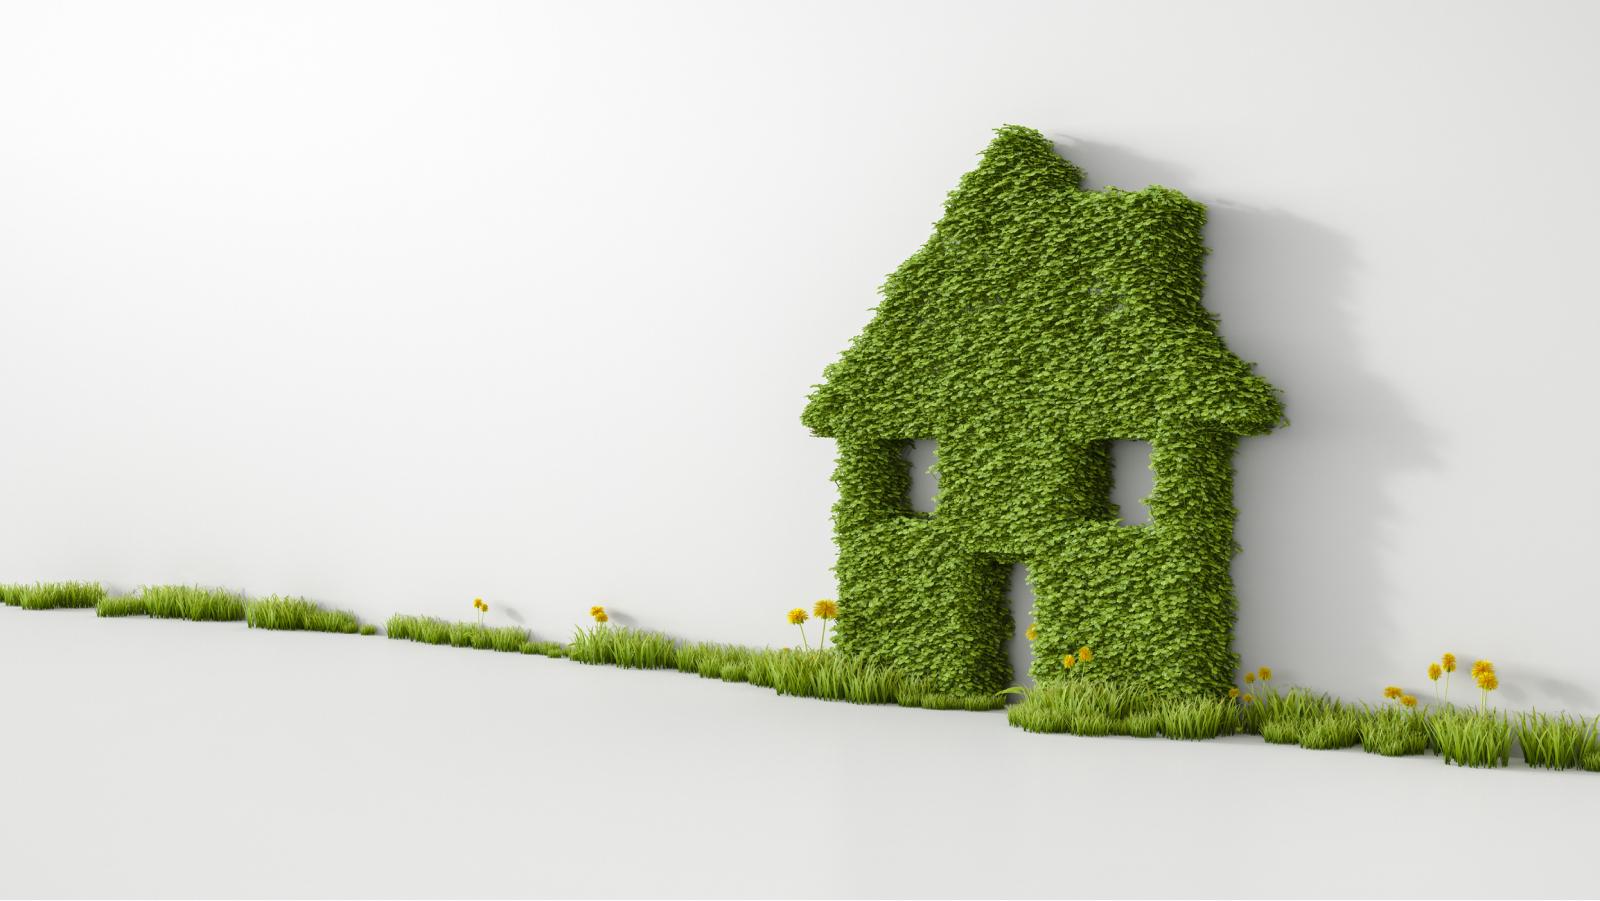 A conceptual image depicting a house made out of greenery.